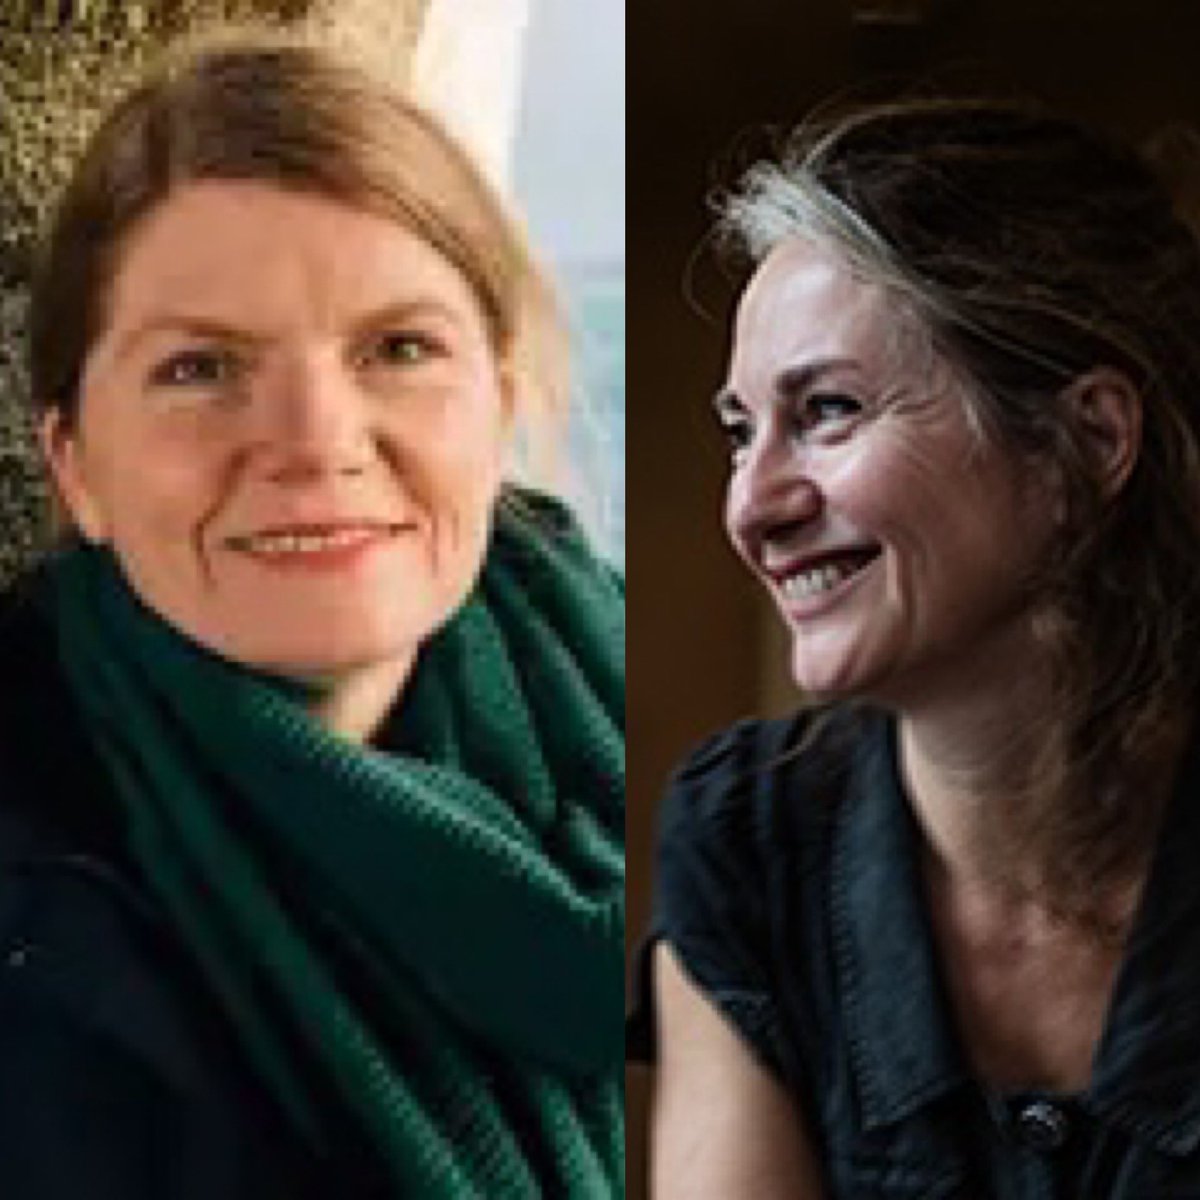 Because a long weekend just isn’t enough and we want to spread the joy we now have @NCornBookFest Author Tours. The next starts this Thursday and stars Rachel Joyce & @CatRentzenbrink! Come!thelittleboxoffice.com/endelienta/eve…